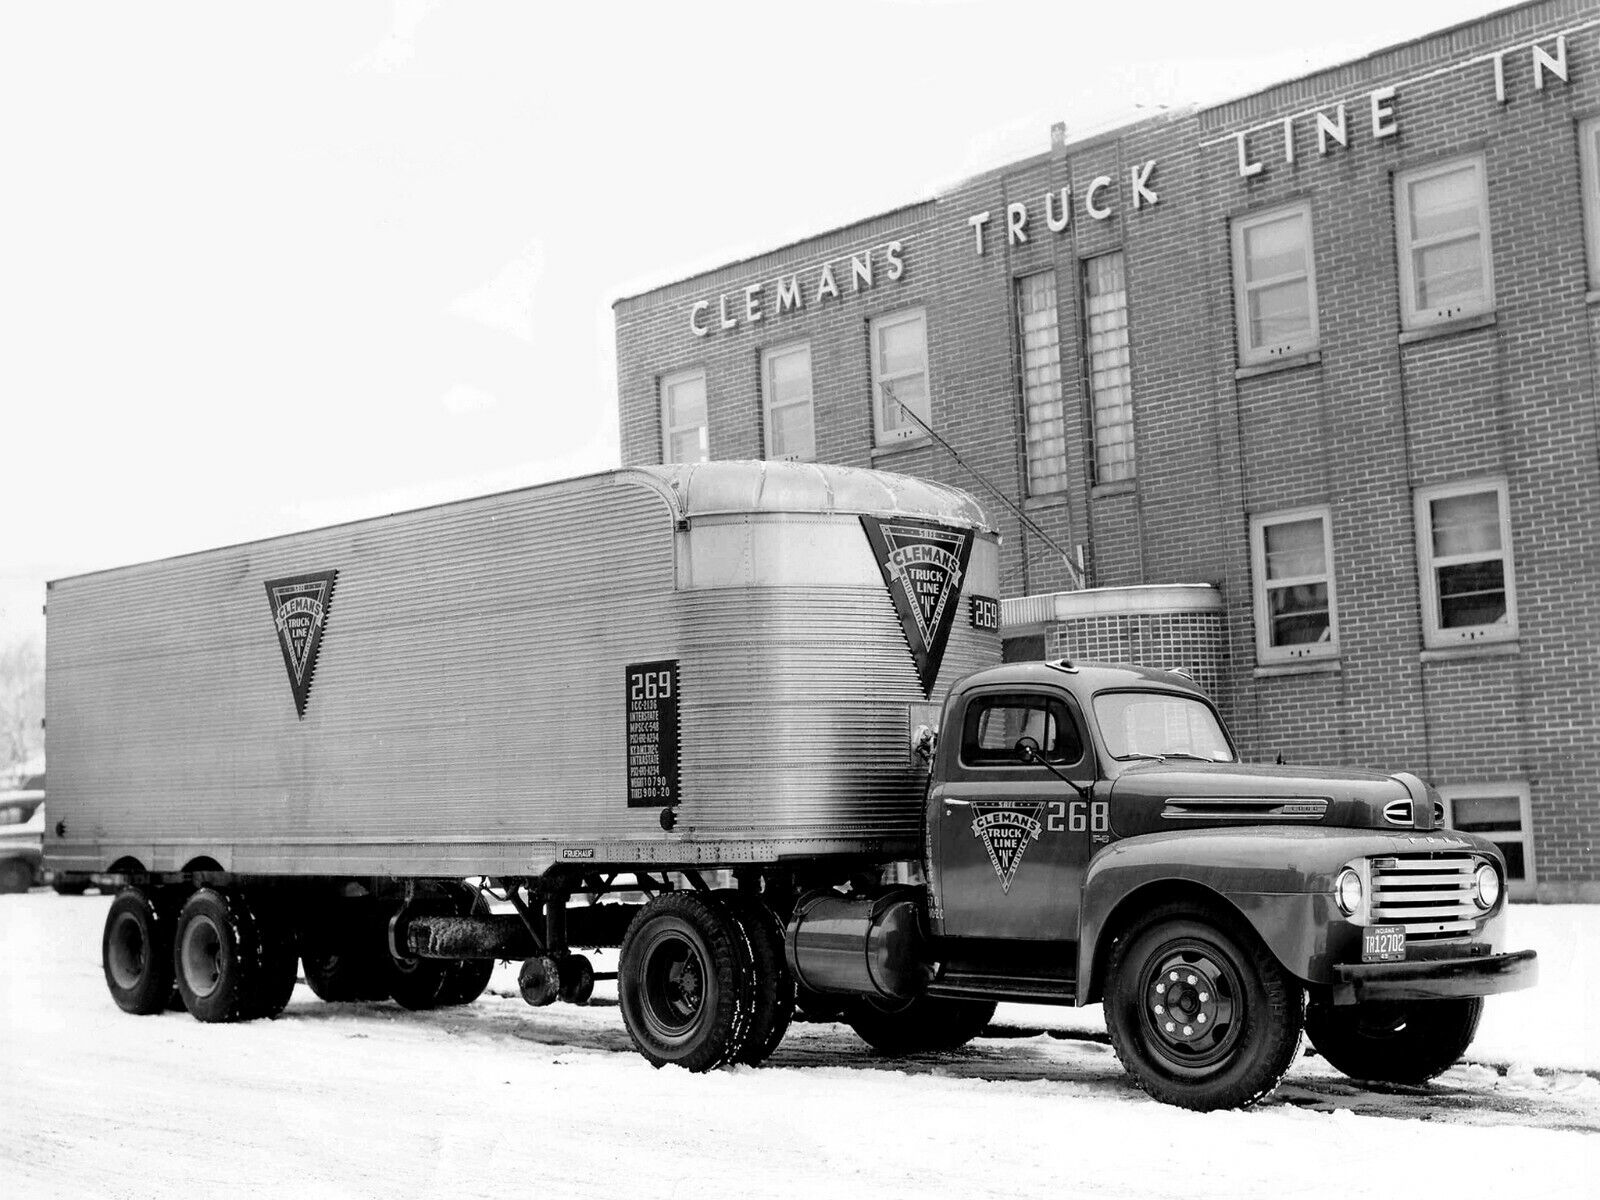 Ford F-8 1948 Clemans Truck Line Inc 8 x 10 photograph